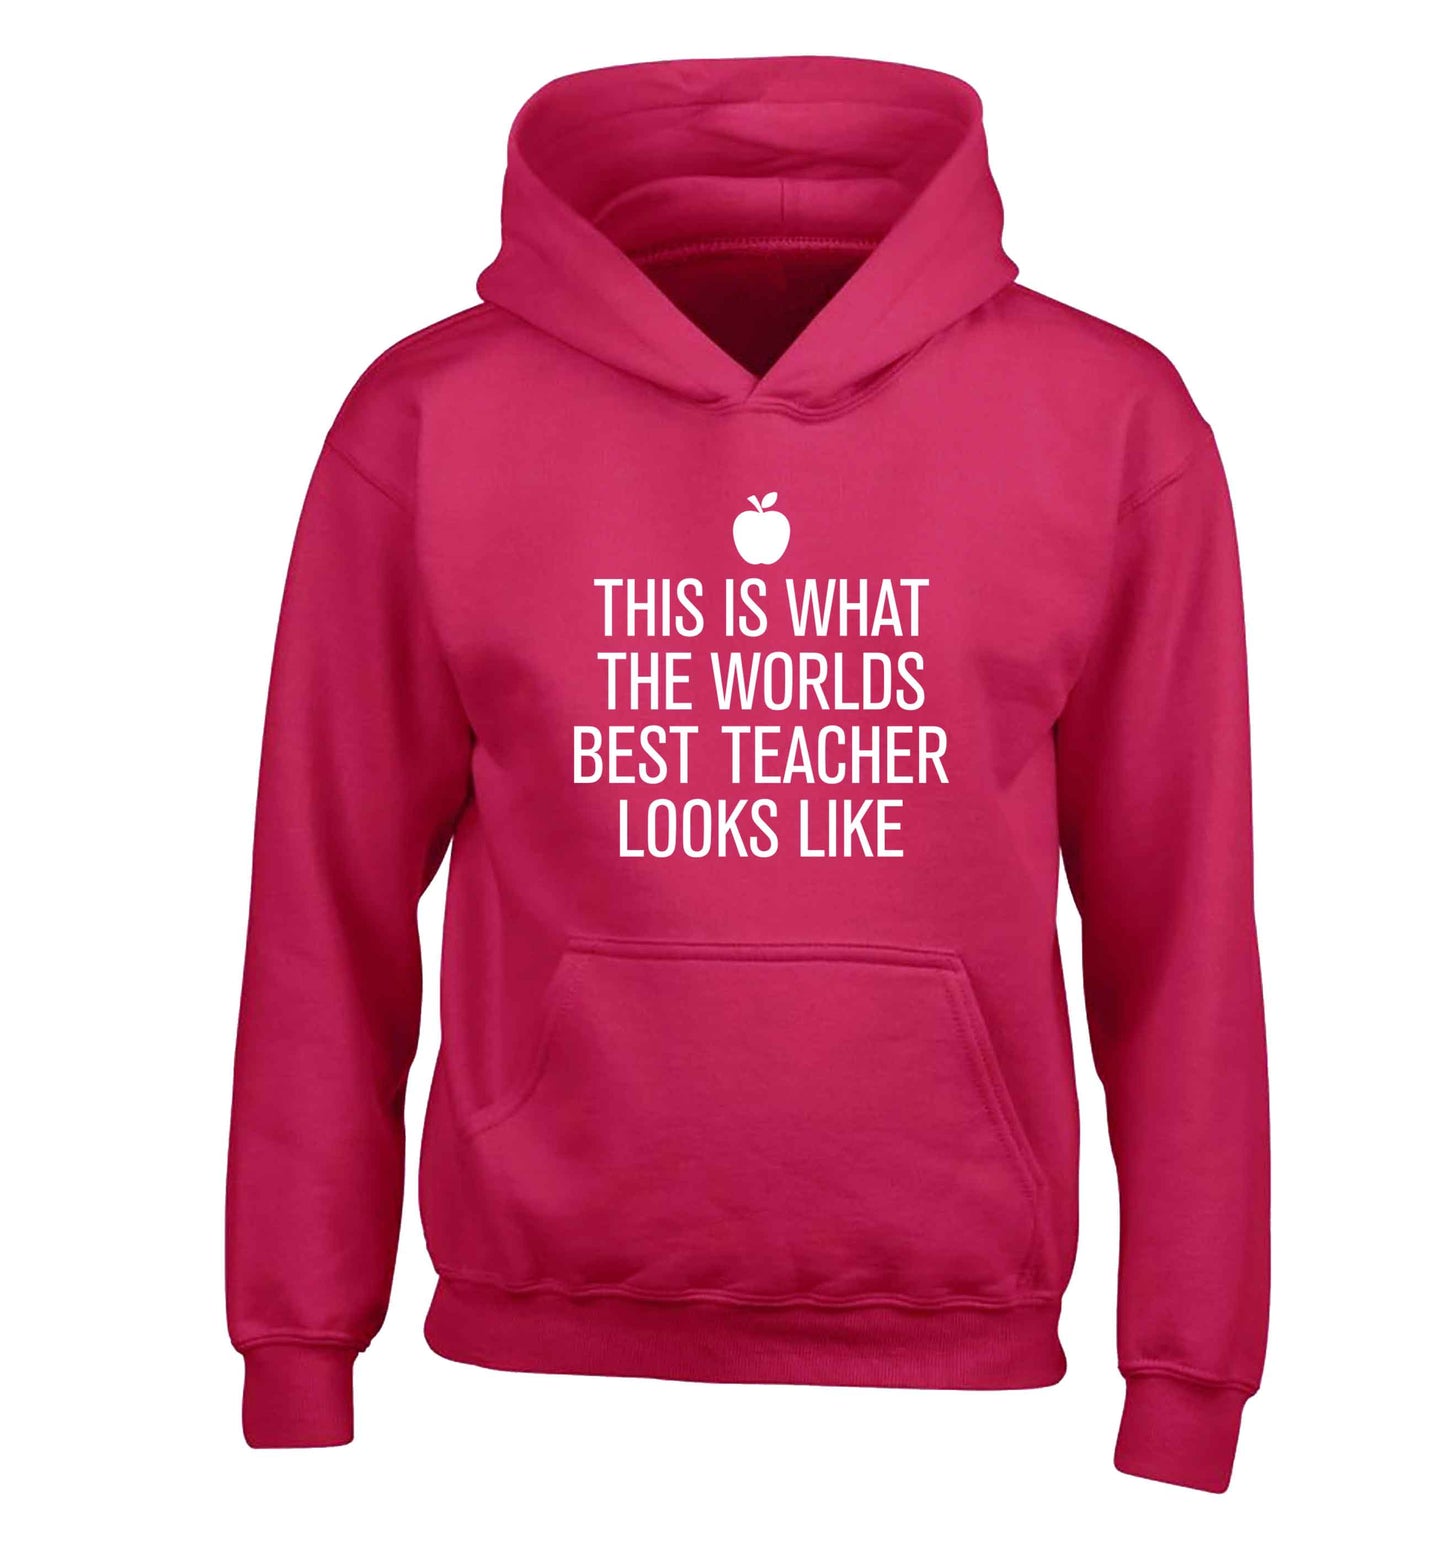 This is what the worlds best teacher looks like children's pink hoodie 12-13 Years